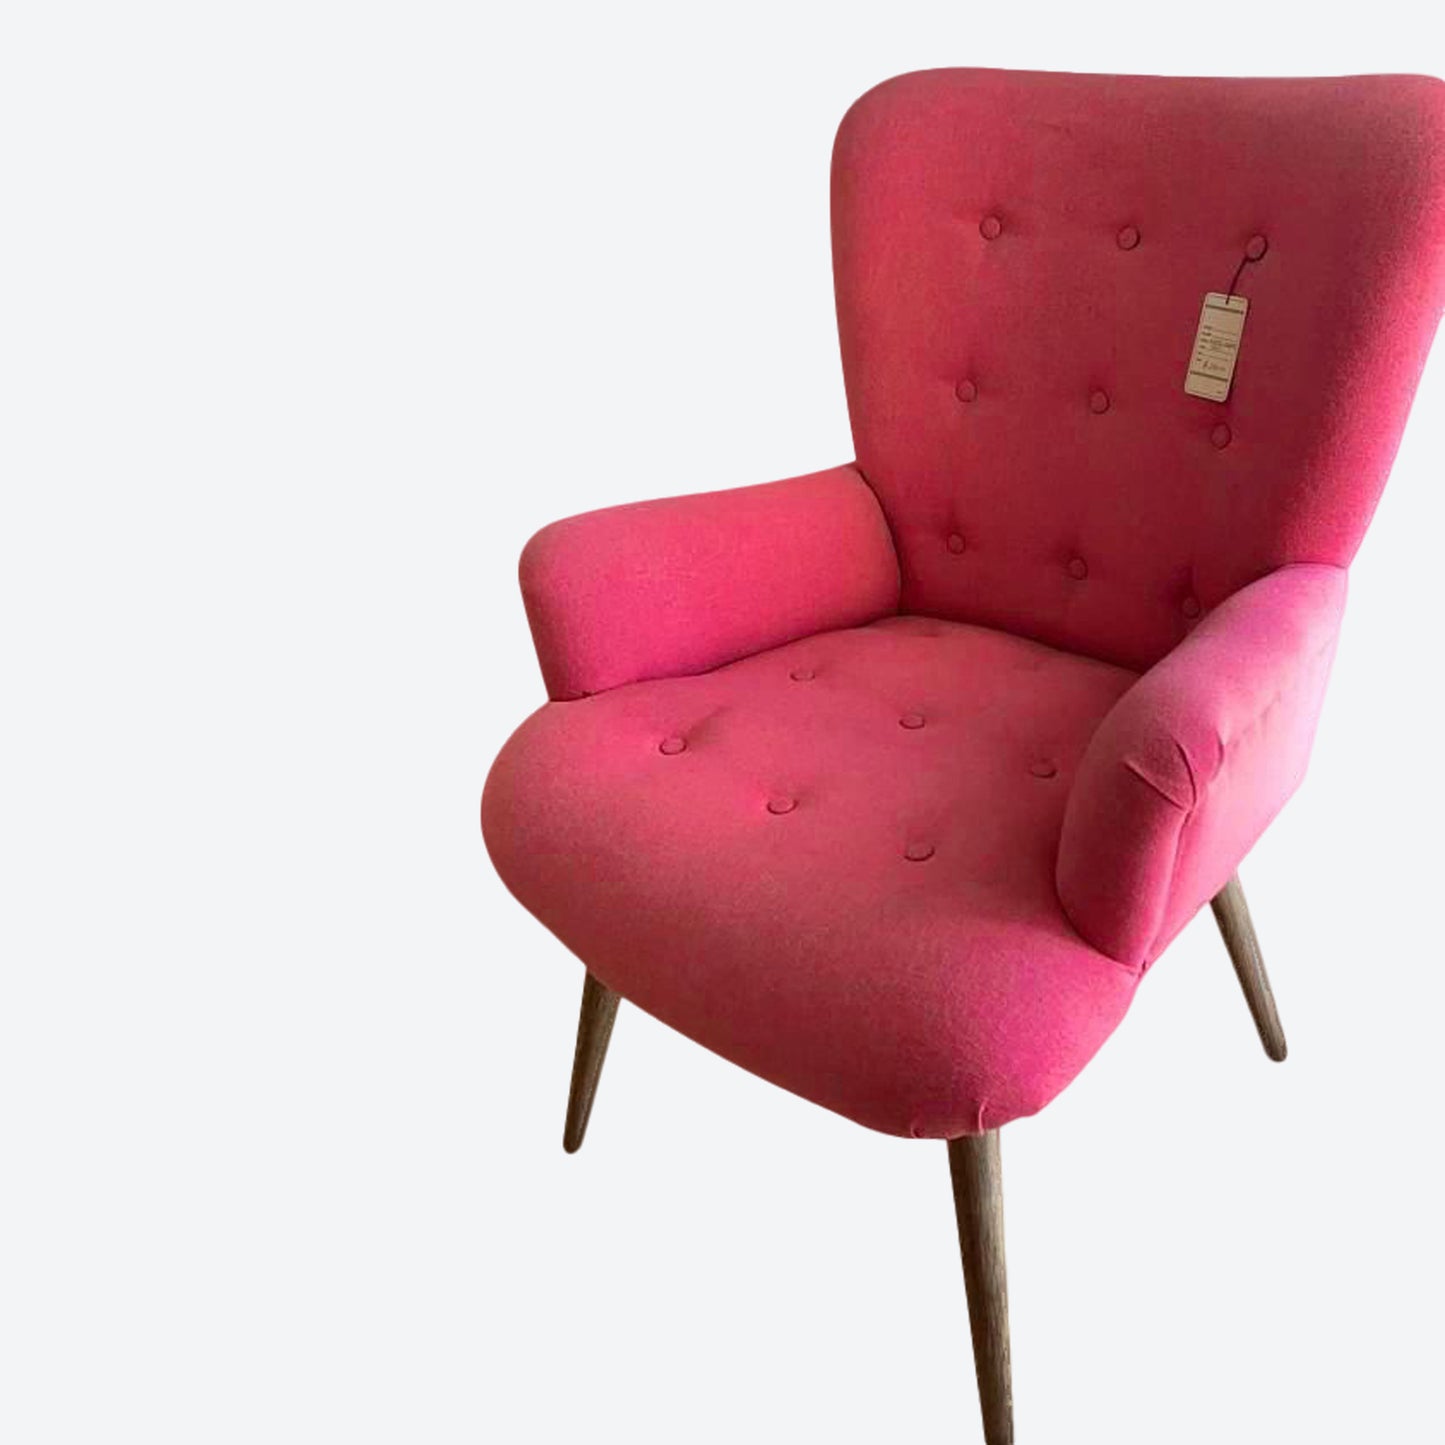 Pink Organic Canvas Fabric Tufted Chair With Cedar Wood Frame And Legs -SK- SKU 1160